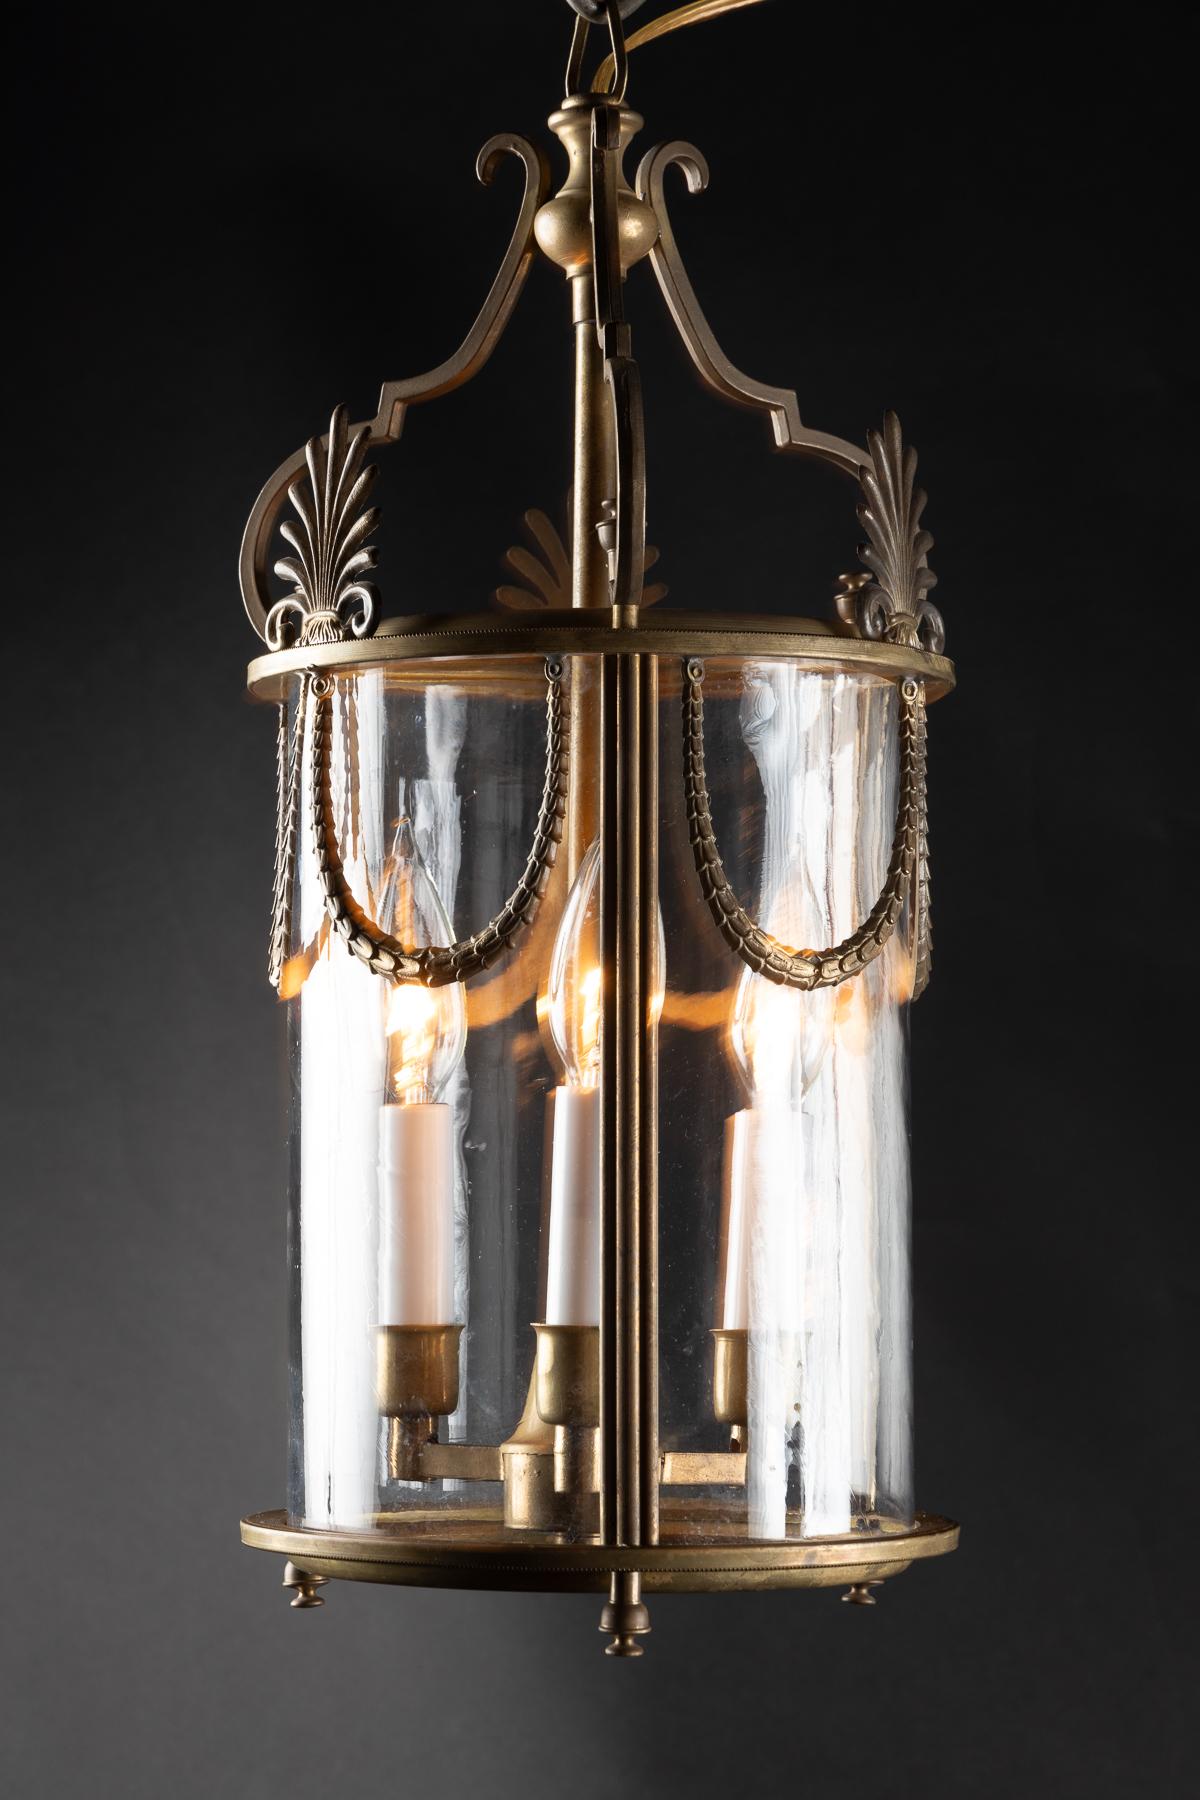 These small cylindrical lanterns are decorated with streams of garlands hanging down from the upper metal rim of the lantern. A trio of palmetto fronds sits atop the metal rim, spaced between three arms that hold the stem of the lantern. The glass